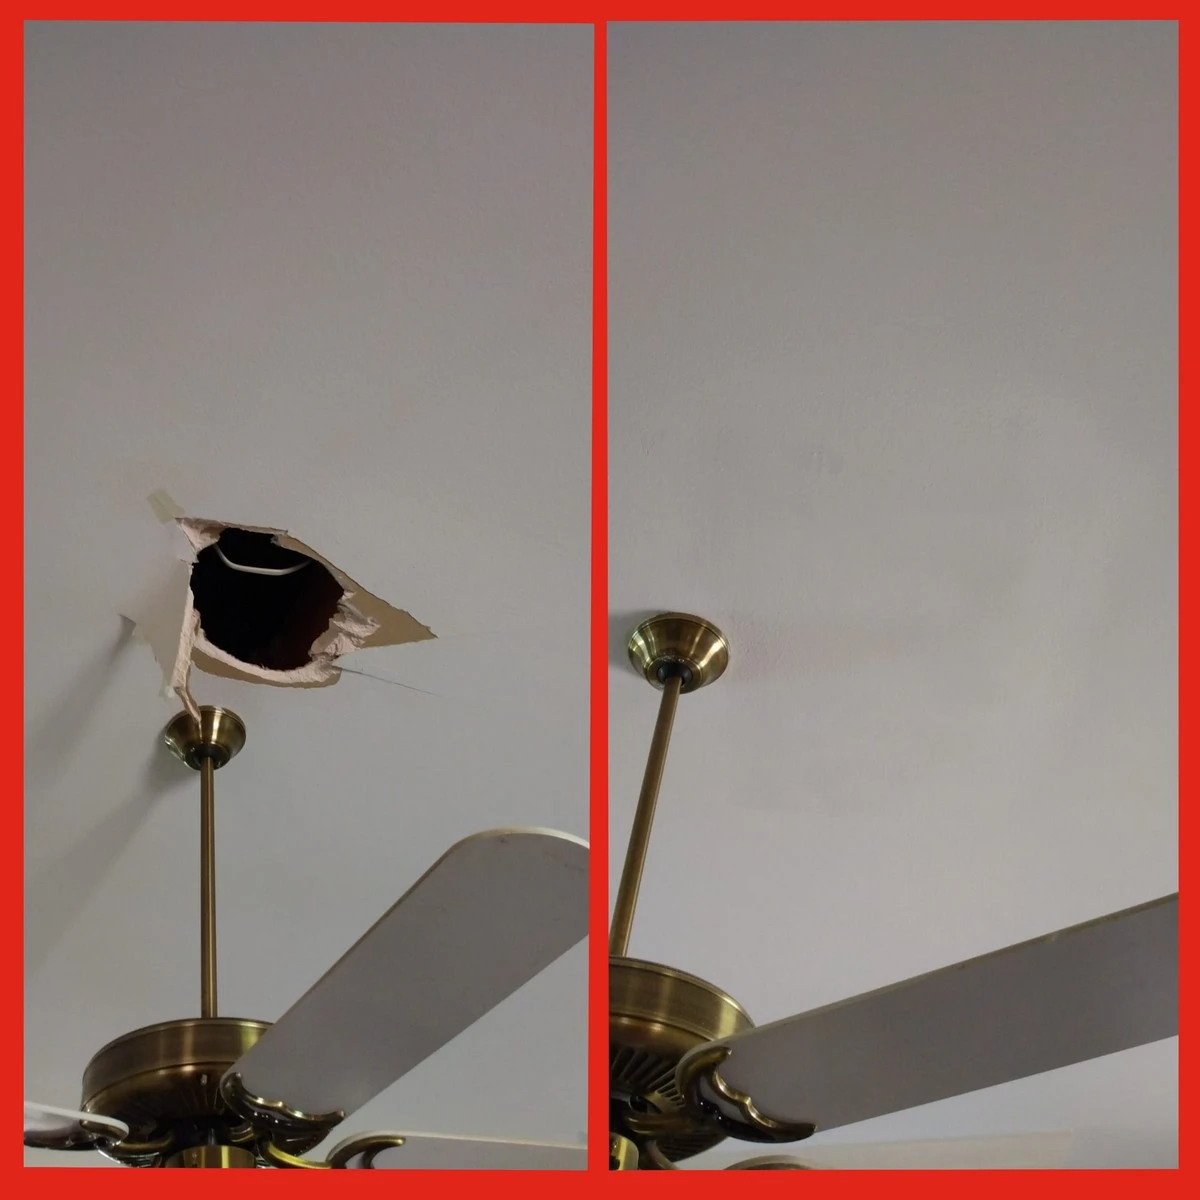 A section of a residential ceiling above a ceiling fan with a hole, and the final results of the repairs for that ceiling hole completed by Mr. Handyman.